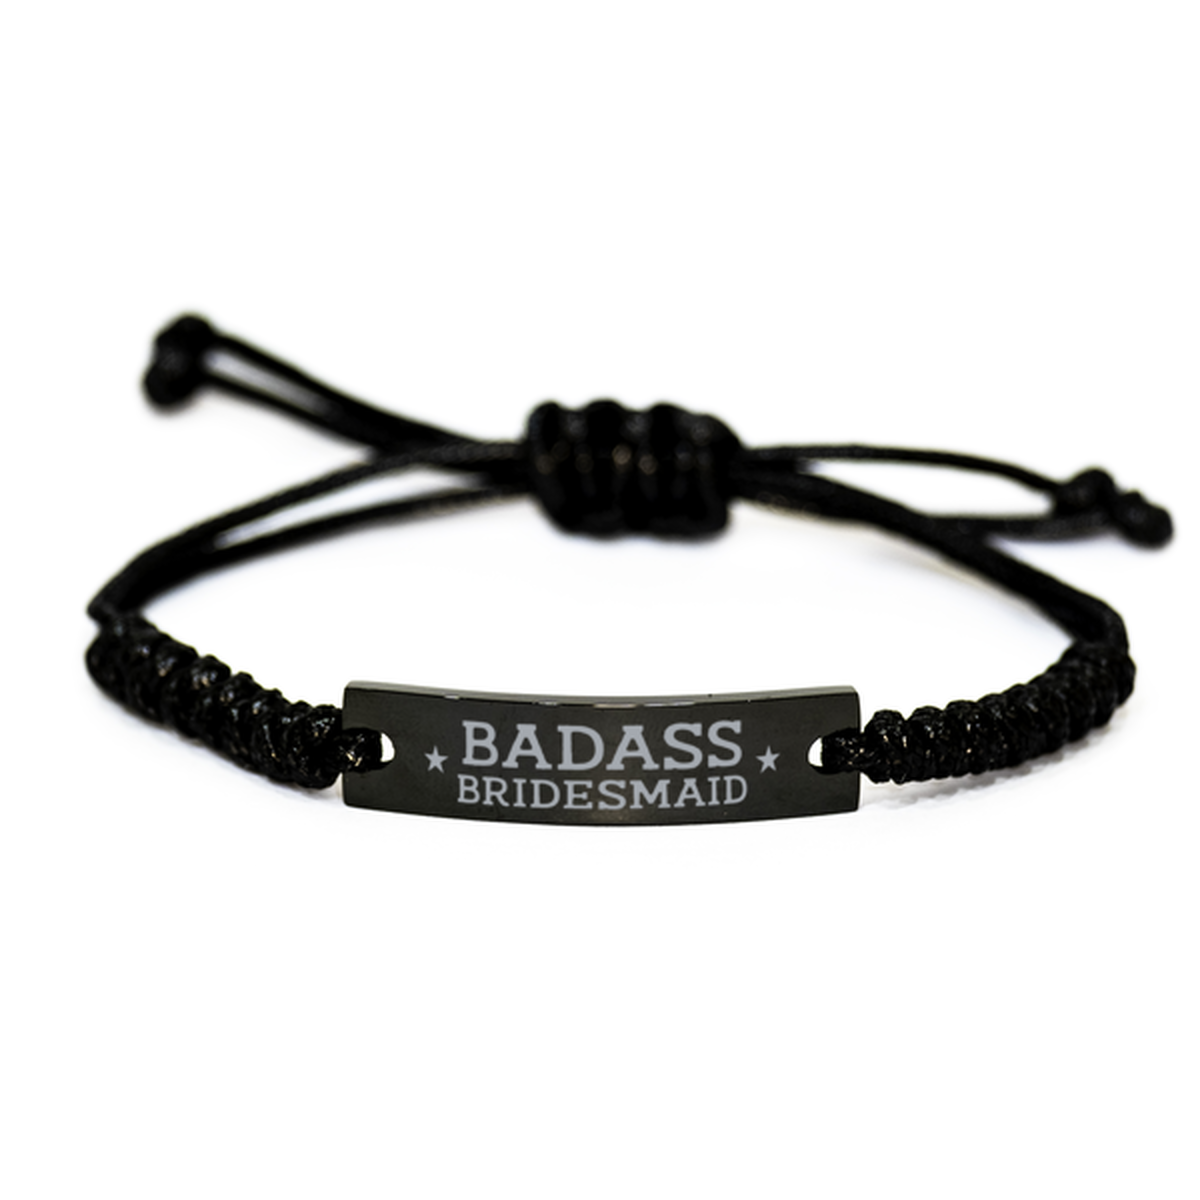 Bridemaid Rope Bracelet, Badass Bridemaid, Funny Family Gifts For Bridemaid From Bride